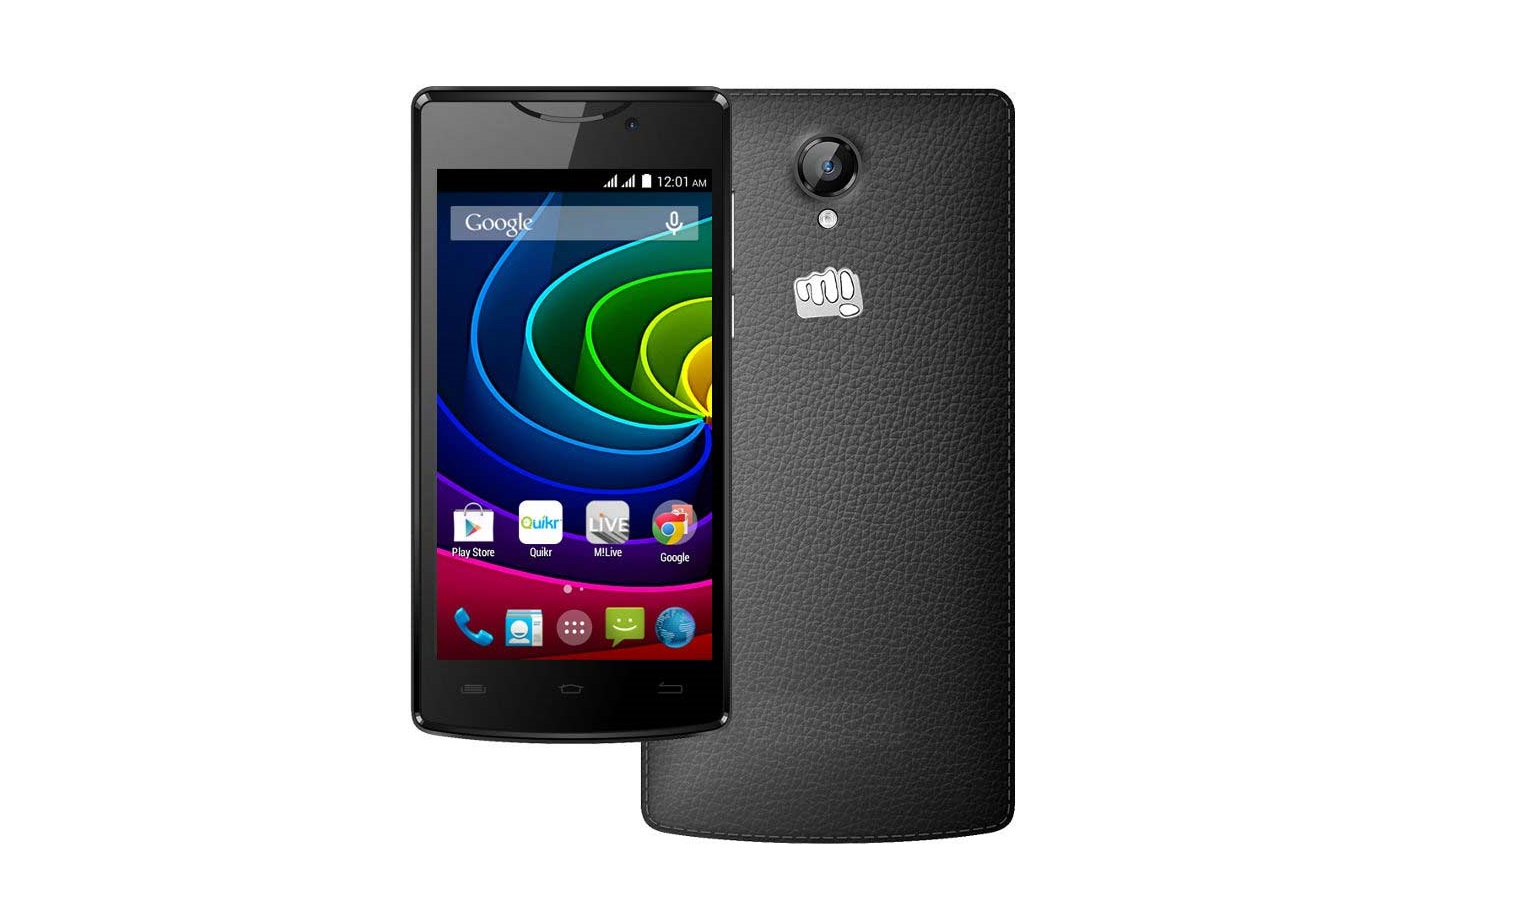 How to Factory Reset Micromax Bolt D320